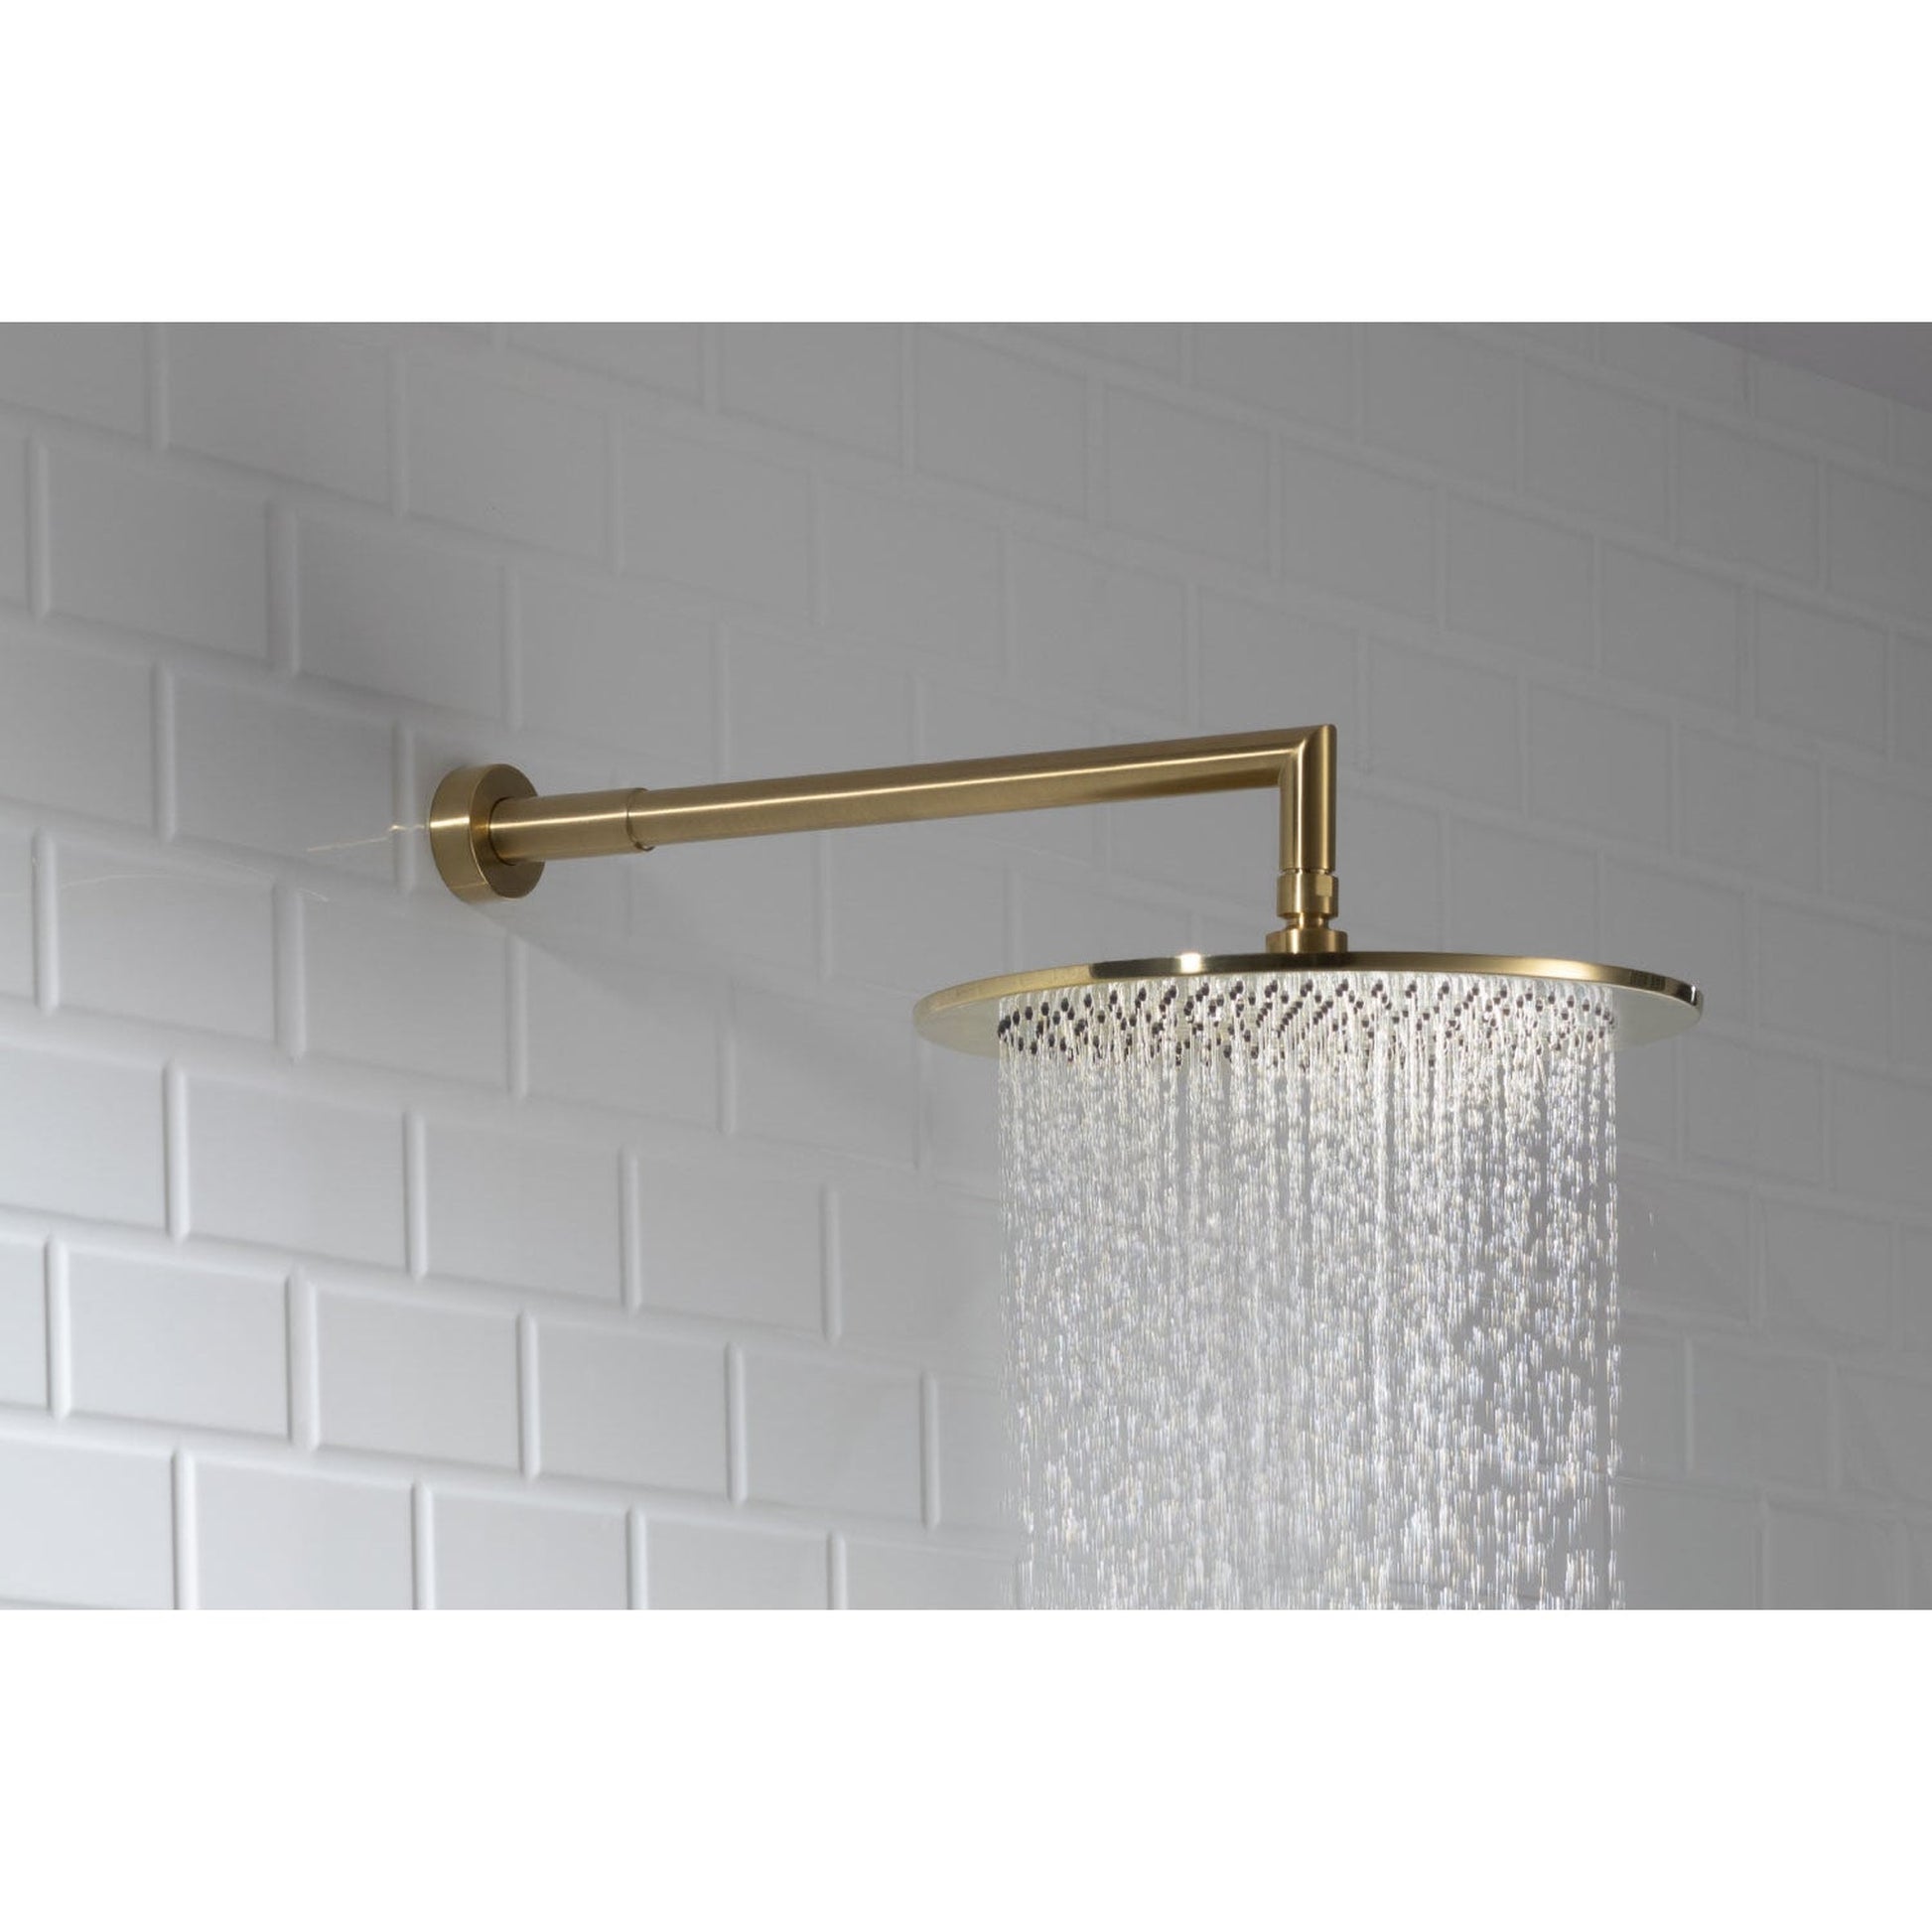 Isenberg Universal Fixtures 10" Single Function Round Polished Brushed Nickel PVD Solid Brass Rain Shower Head With 15" Wall Mounted Shower Arm